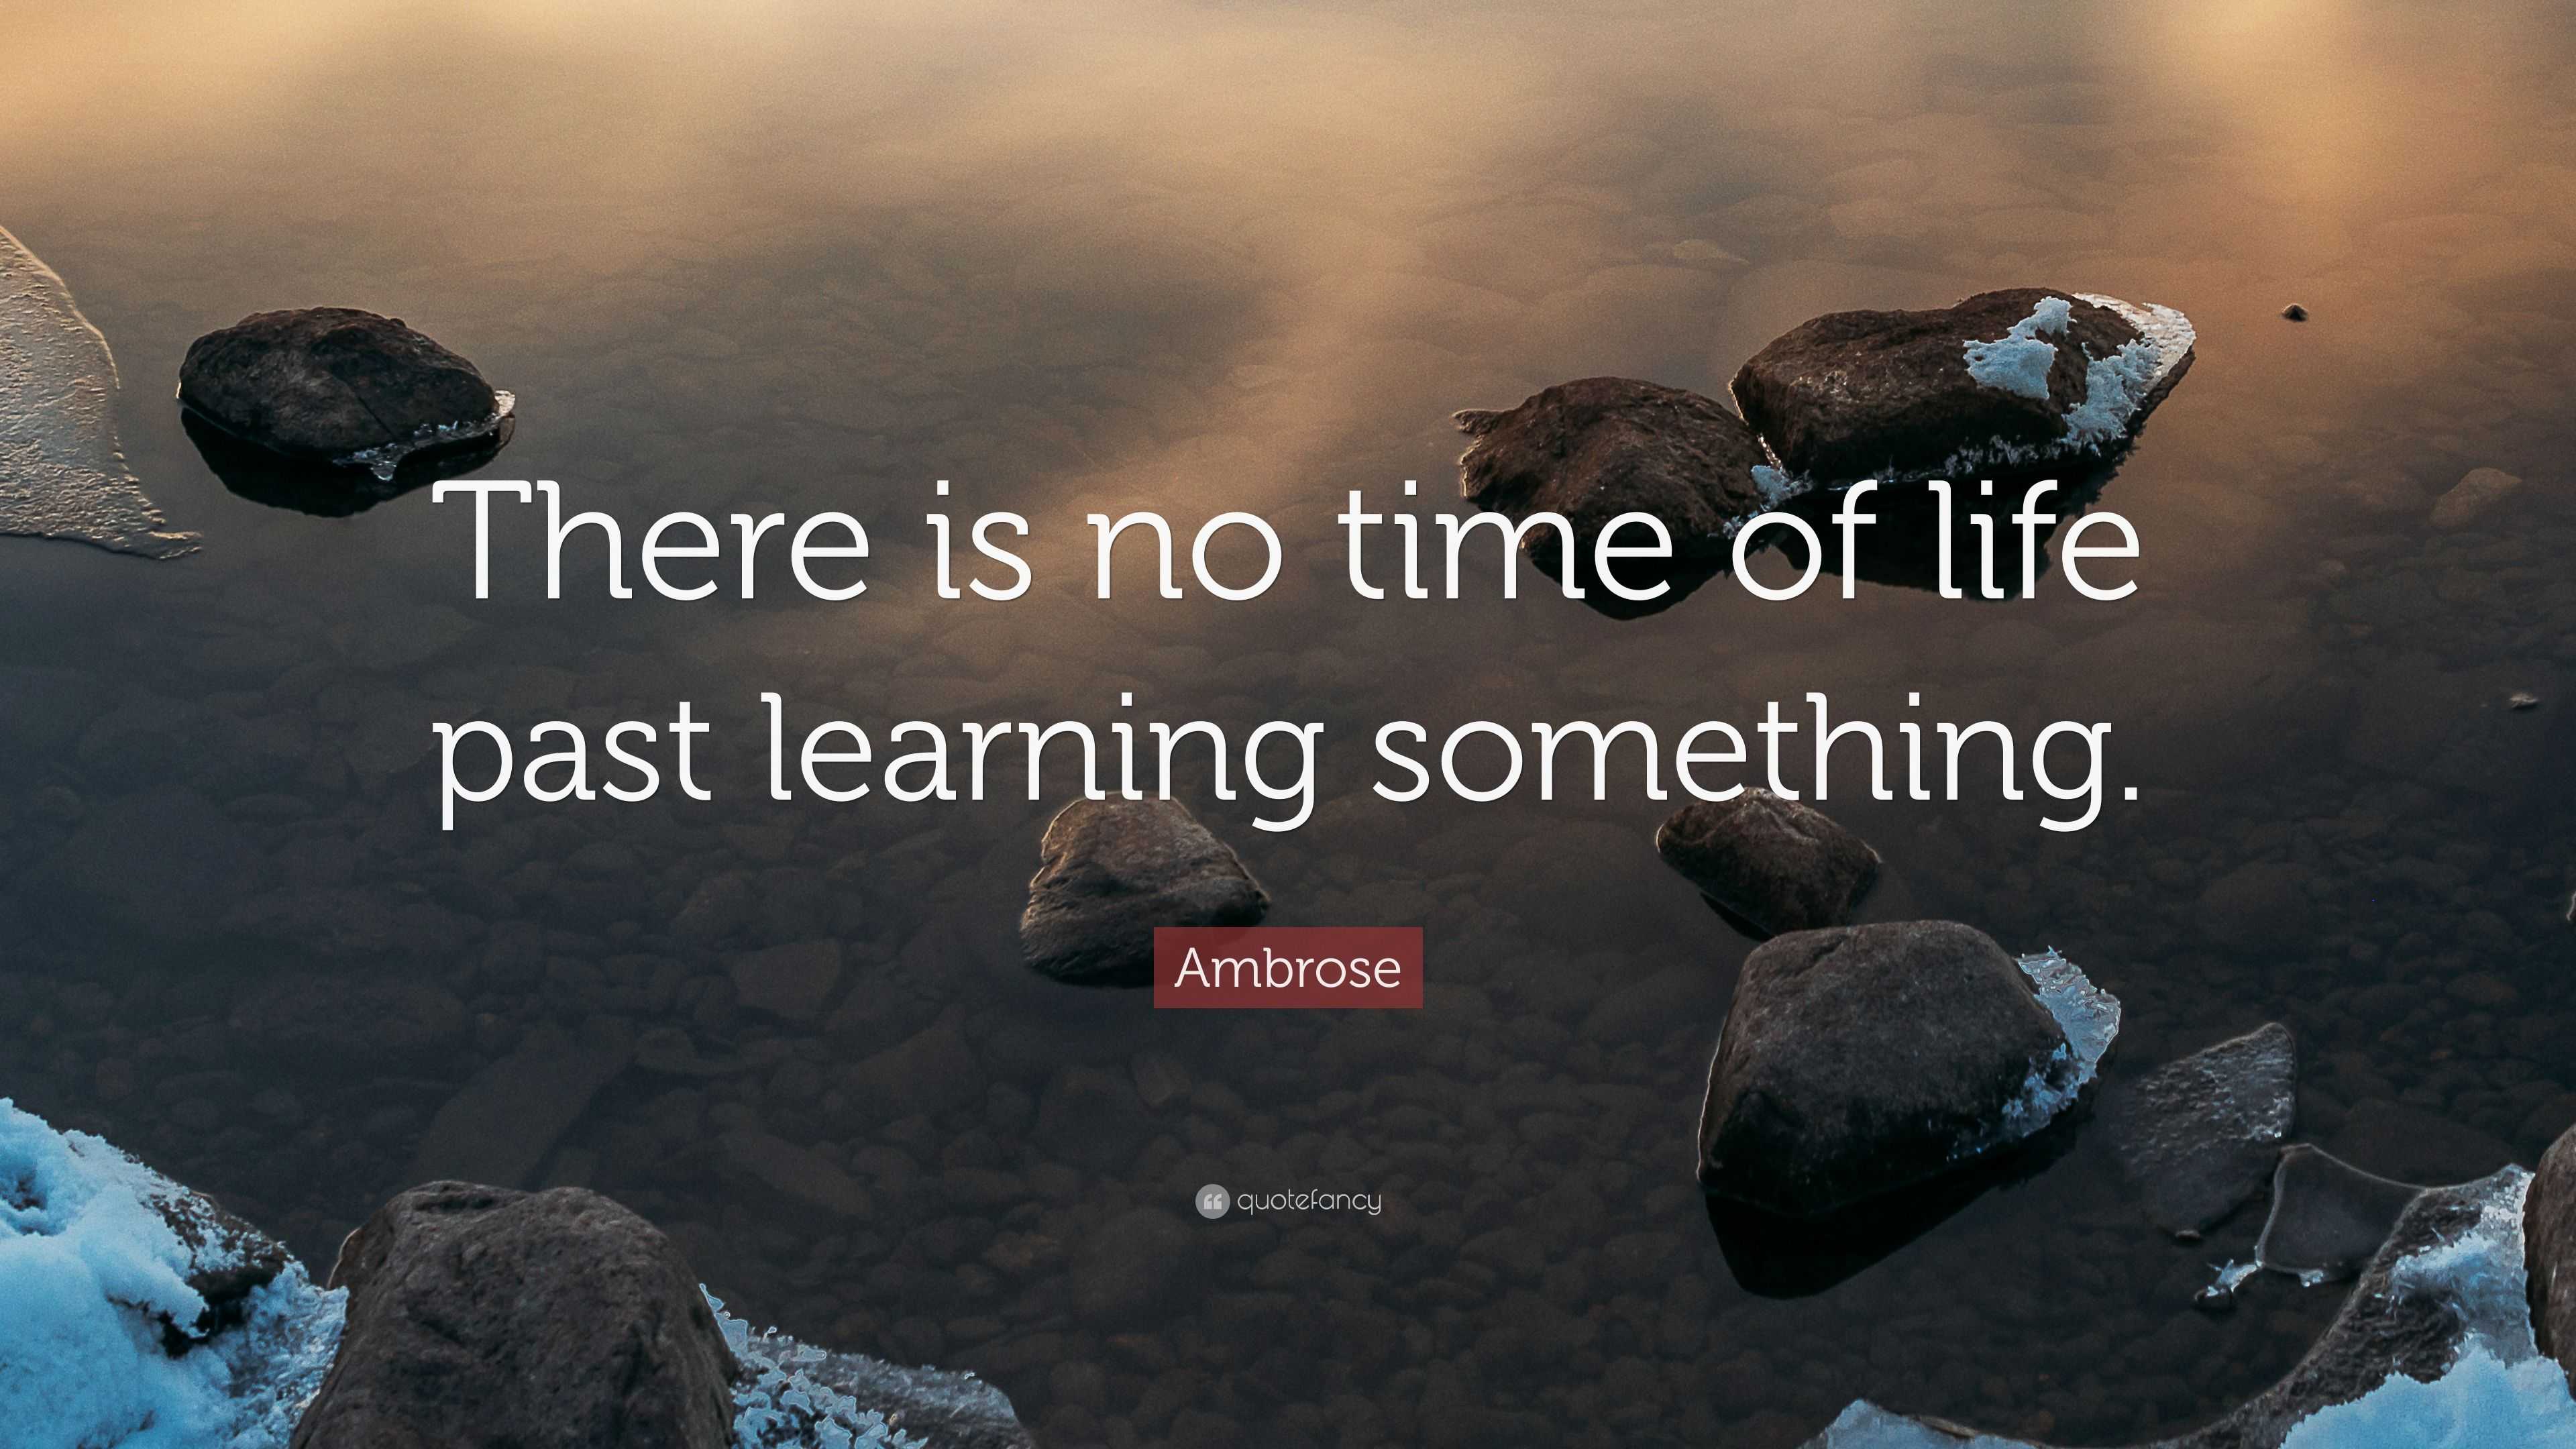 Life is about learning from the past Picture Quotes 5240